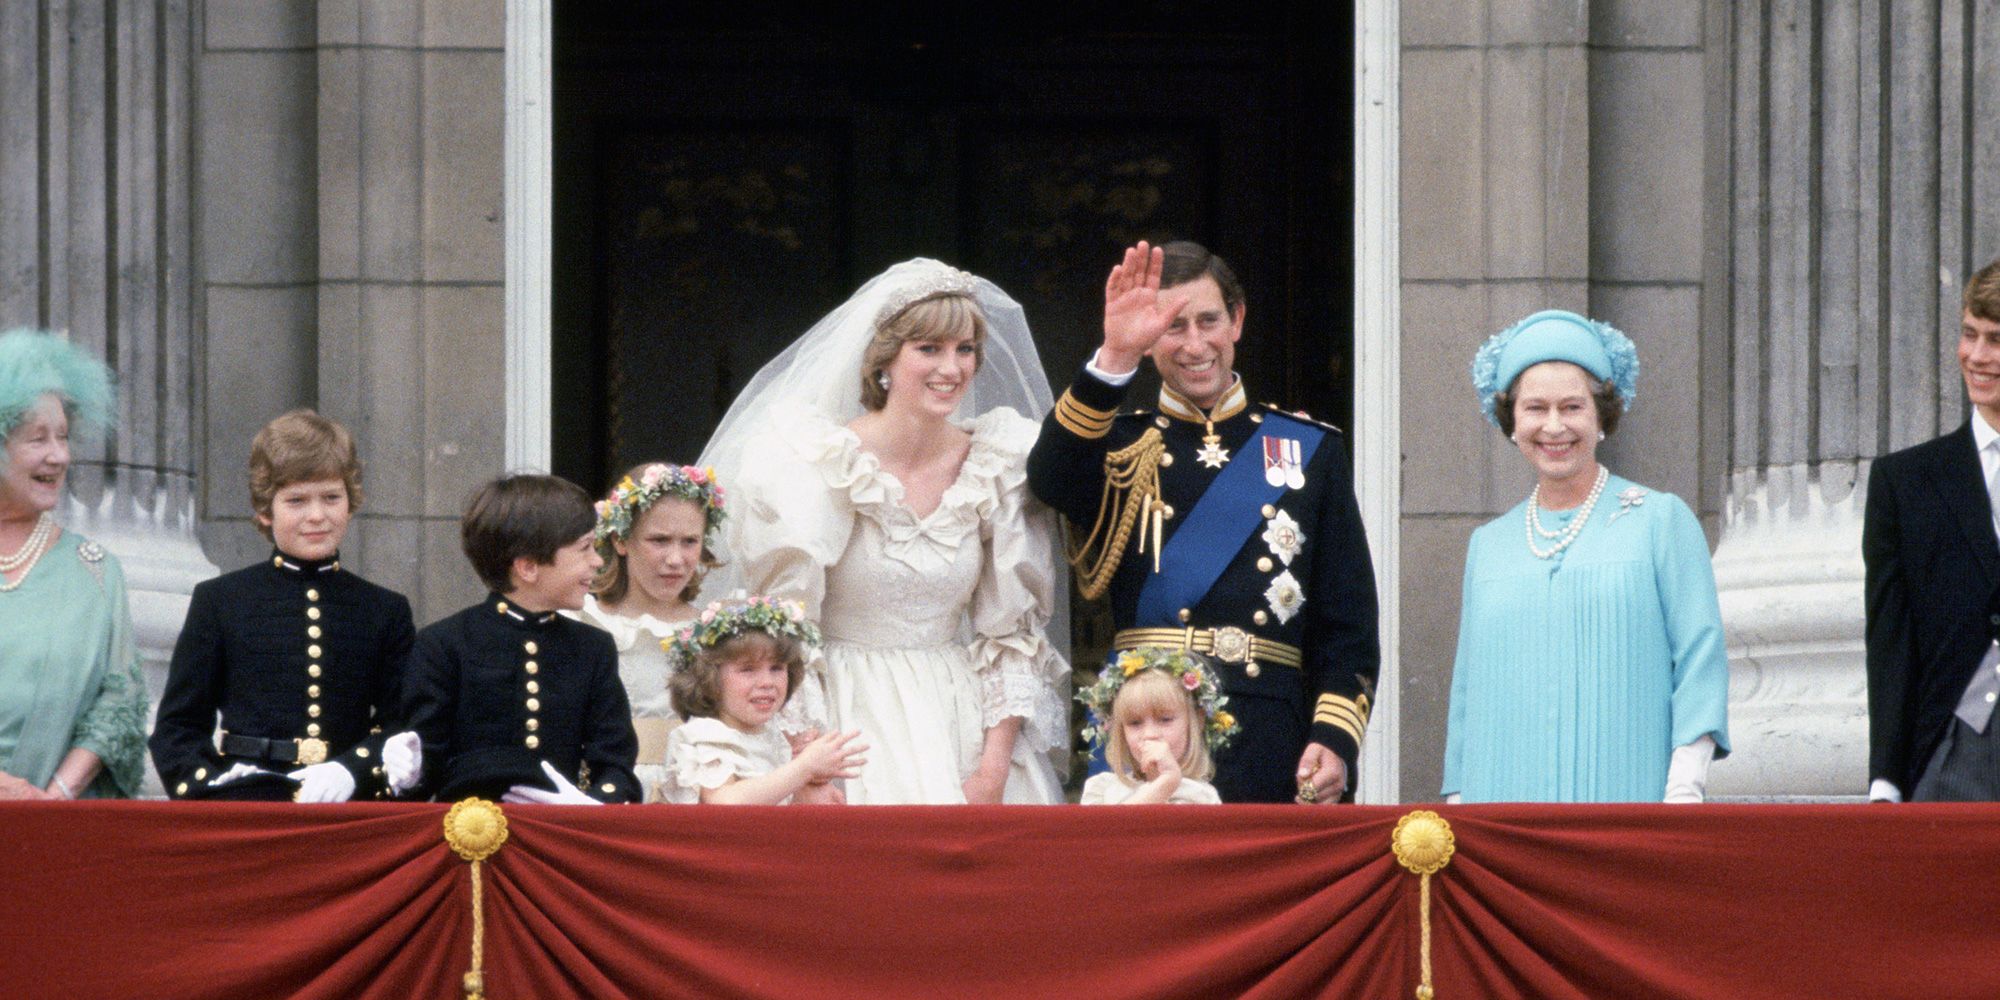 Princess Diana's niece's looked the spitting image of Diana at her wedding over the weekend